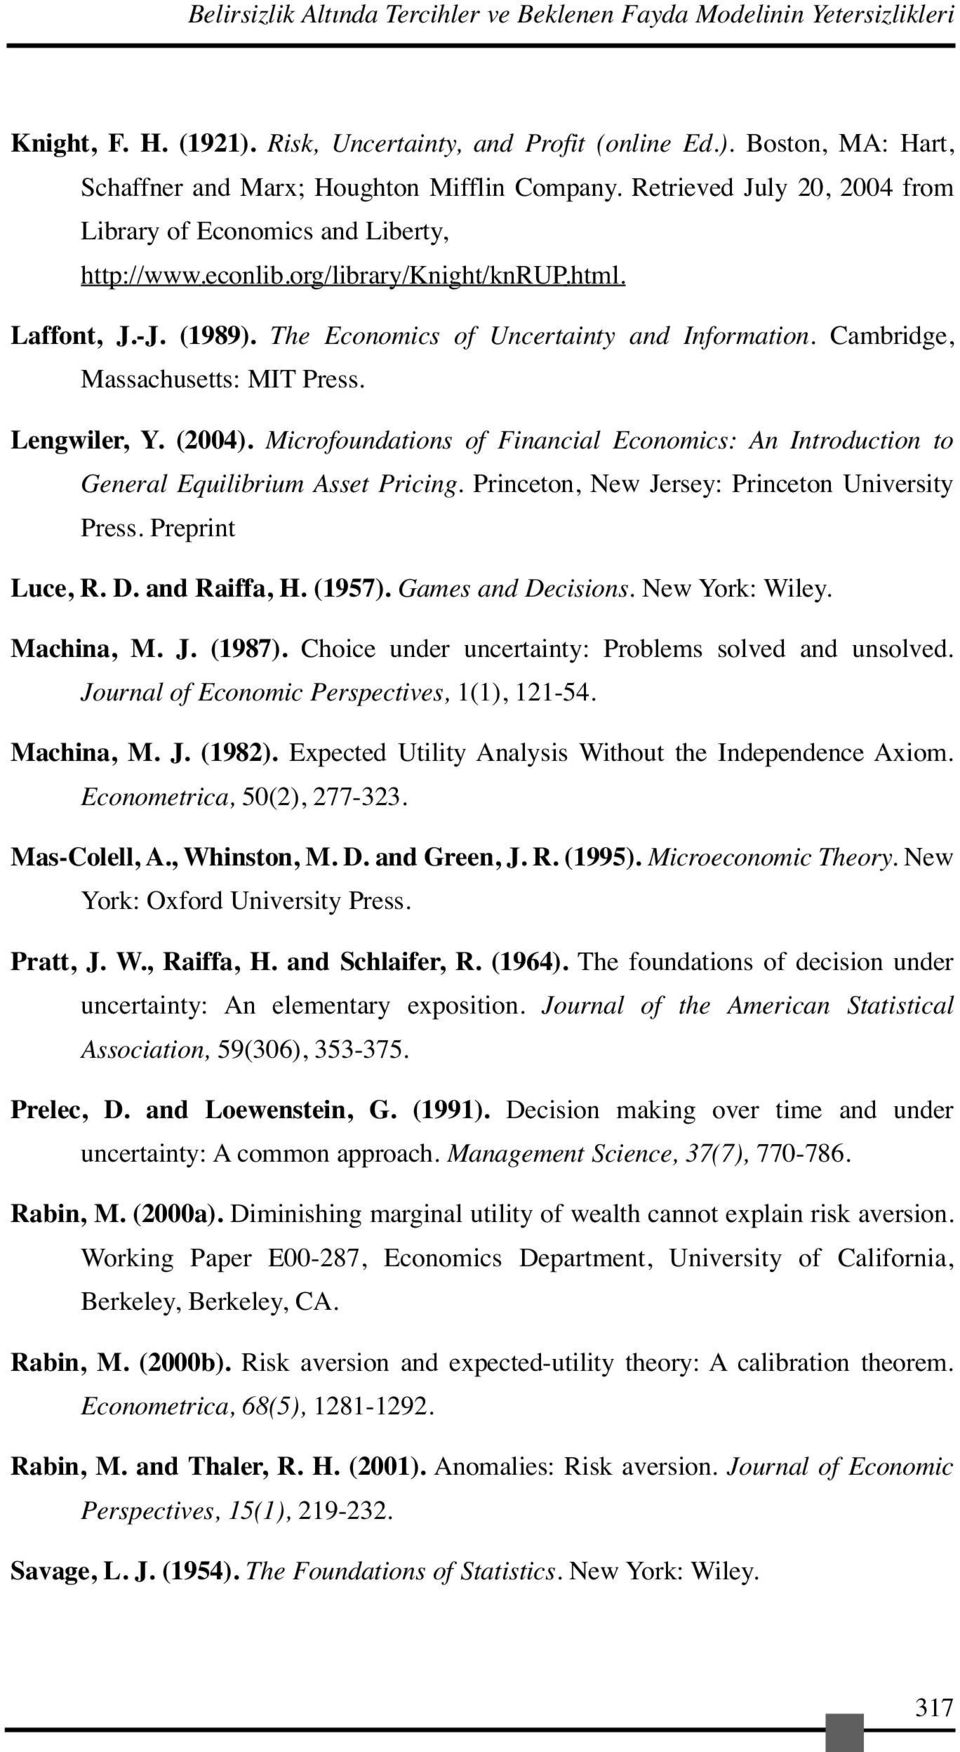 Cambridge, Massachusetts: MIT Press. Lengwiler, Y. (2004). Microfoundations of Financial Economics: An Introduction to General Equilibrium Asset Pricing.